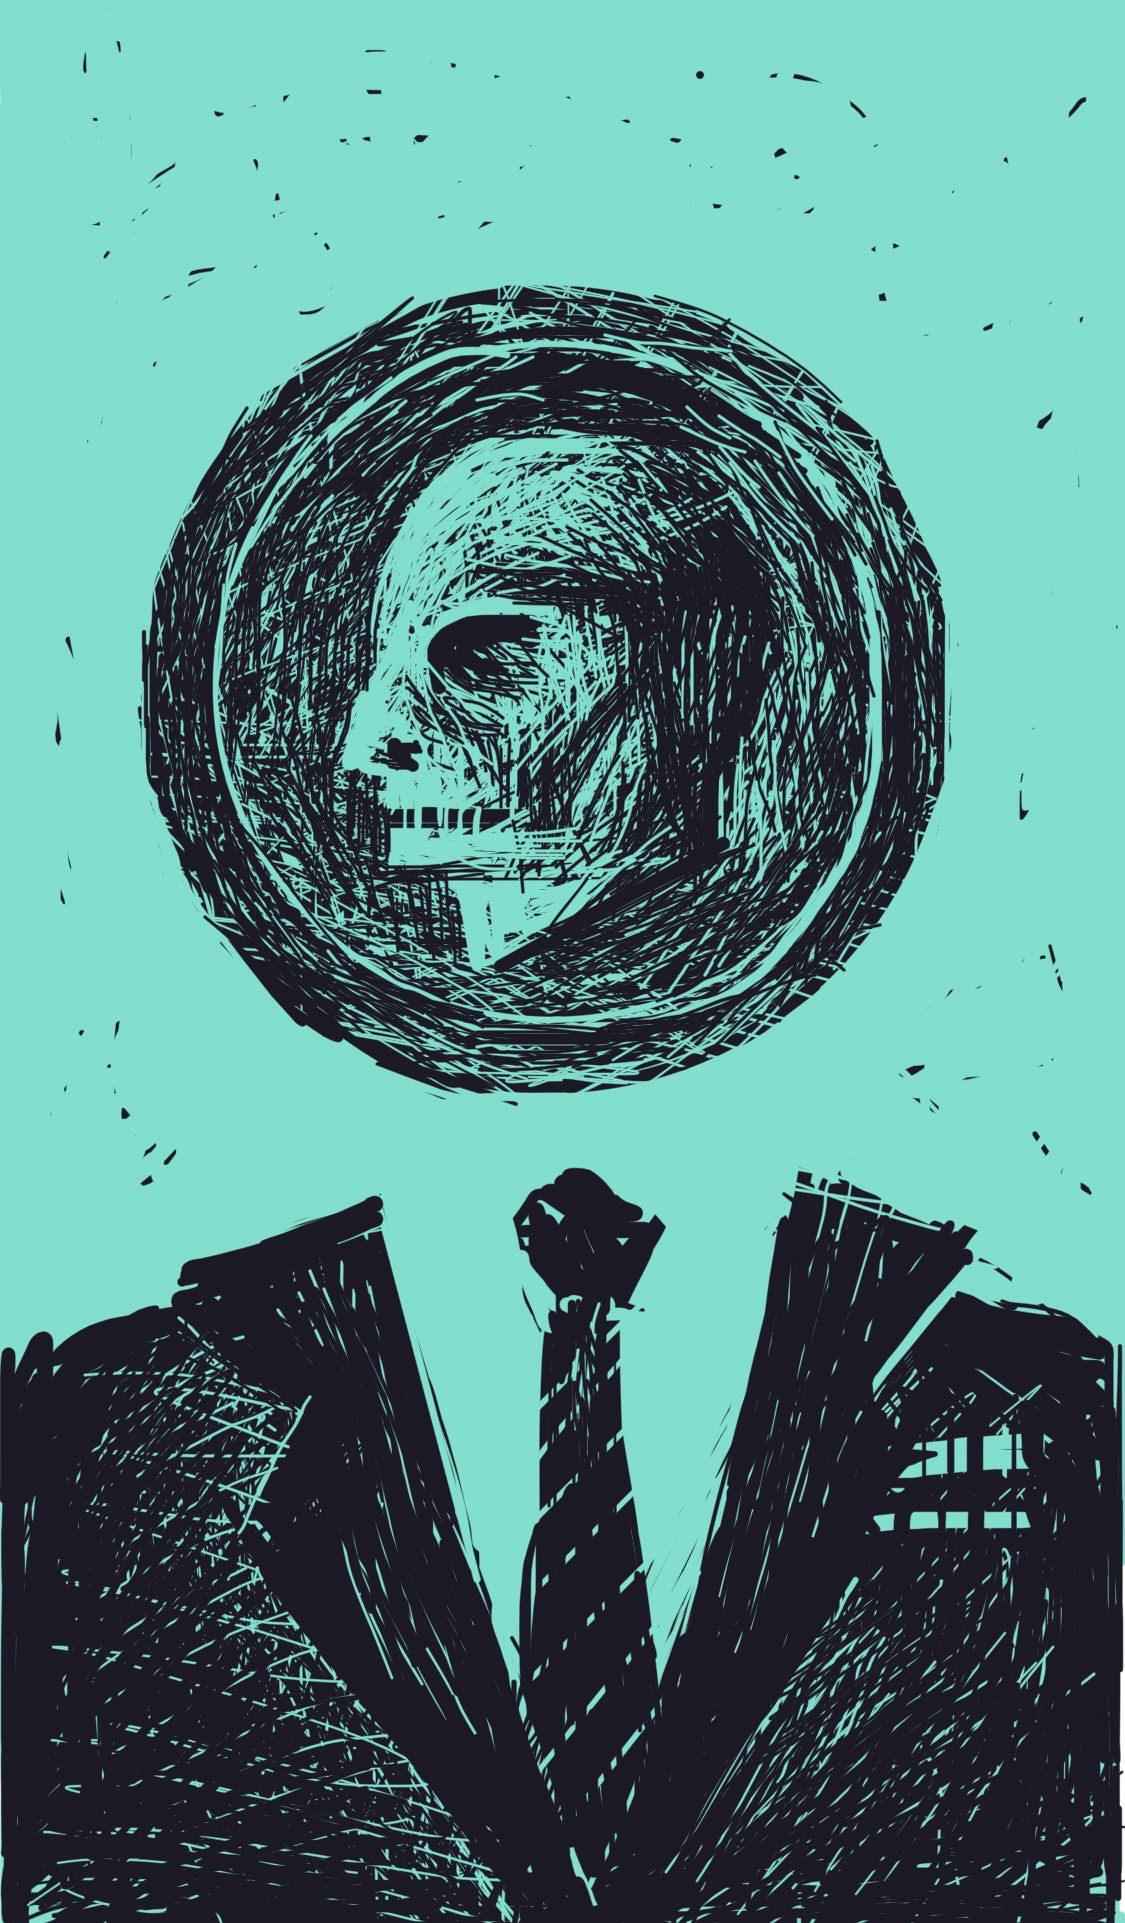 A figure wearing a suit, the head is a coin with a skeletal face in profile